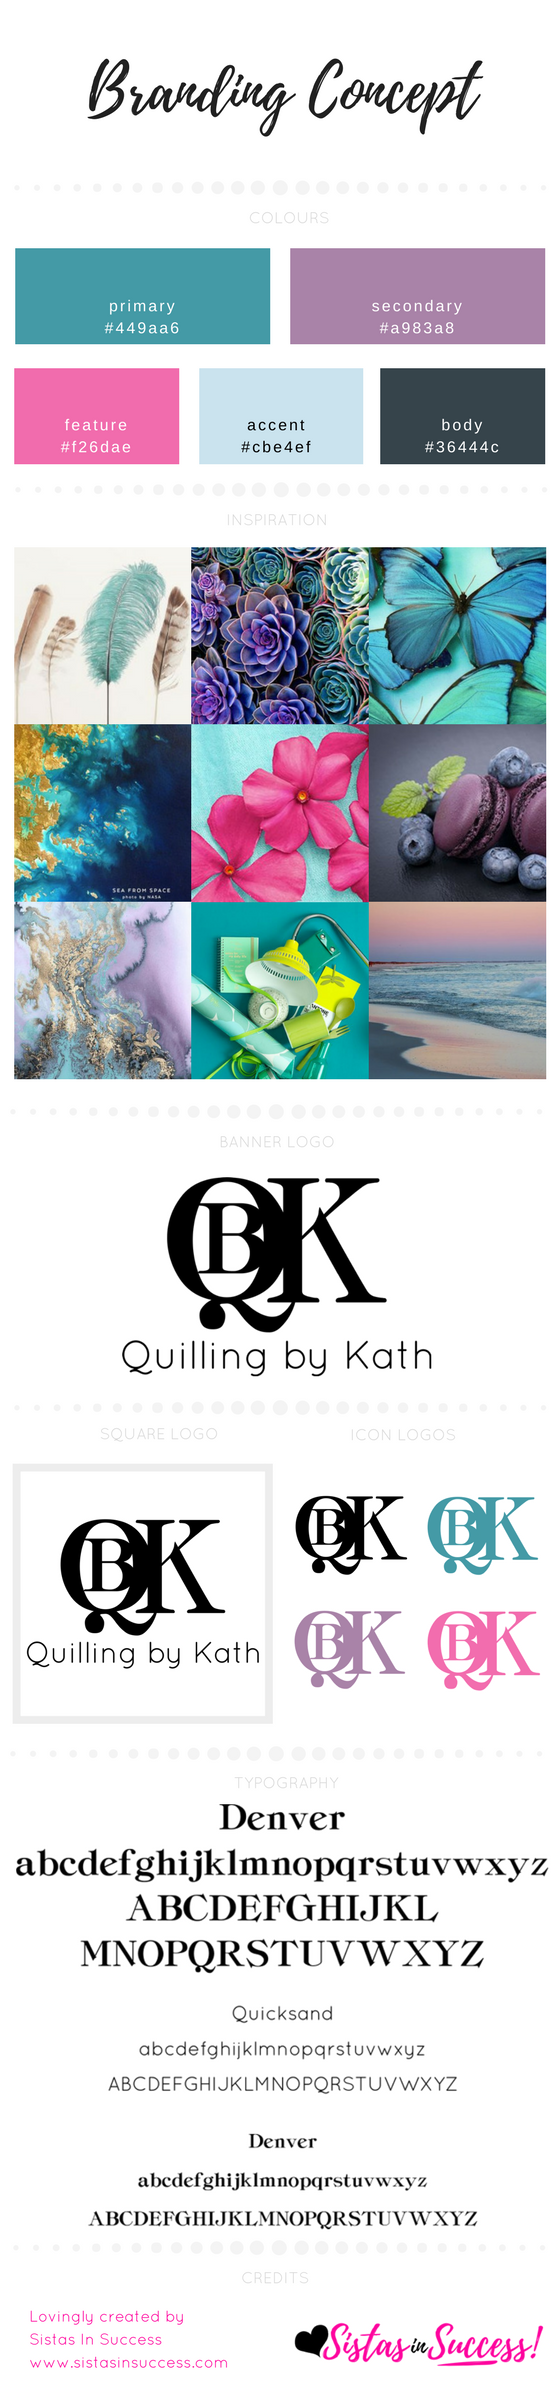 Quilling By Kath Branding Concept V2